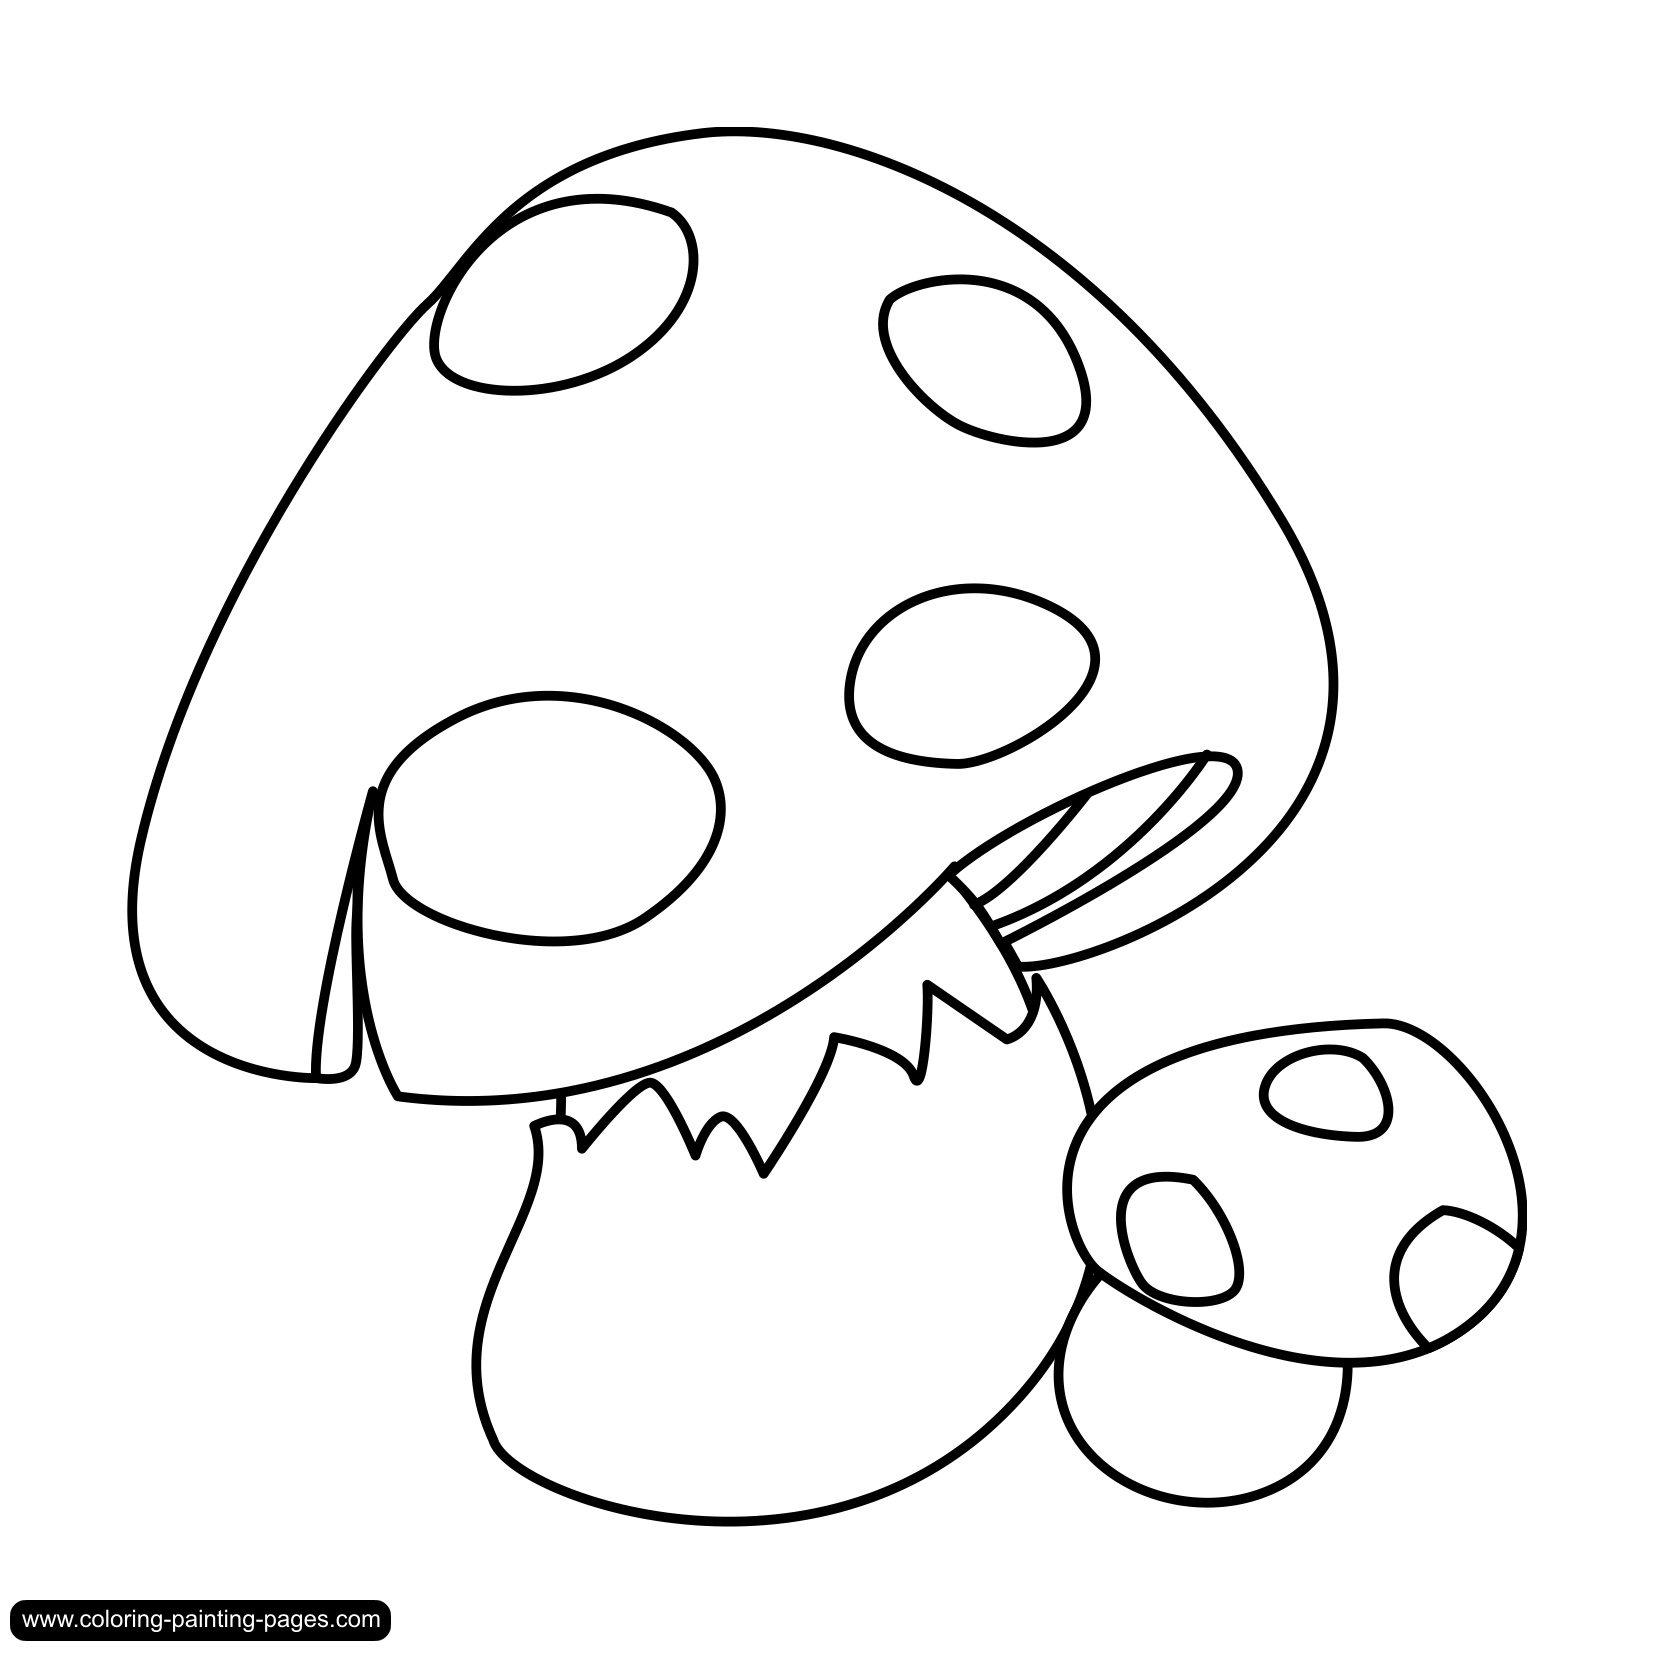 Mushroom Coloring Pages Printable - Printable Word Searches